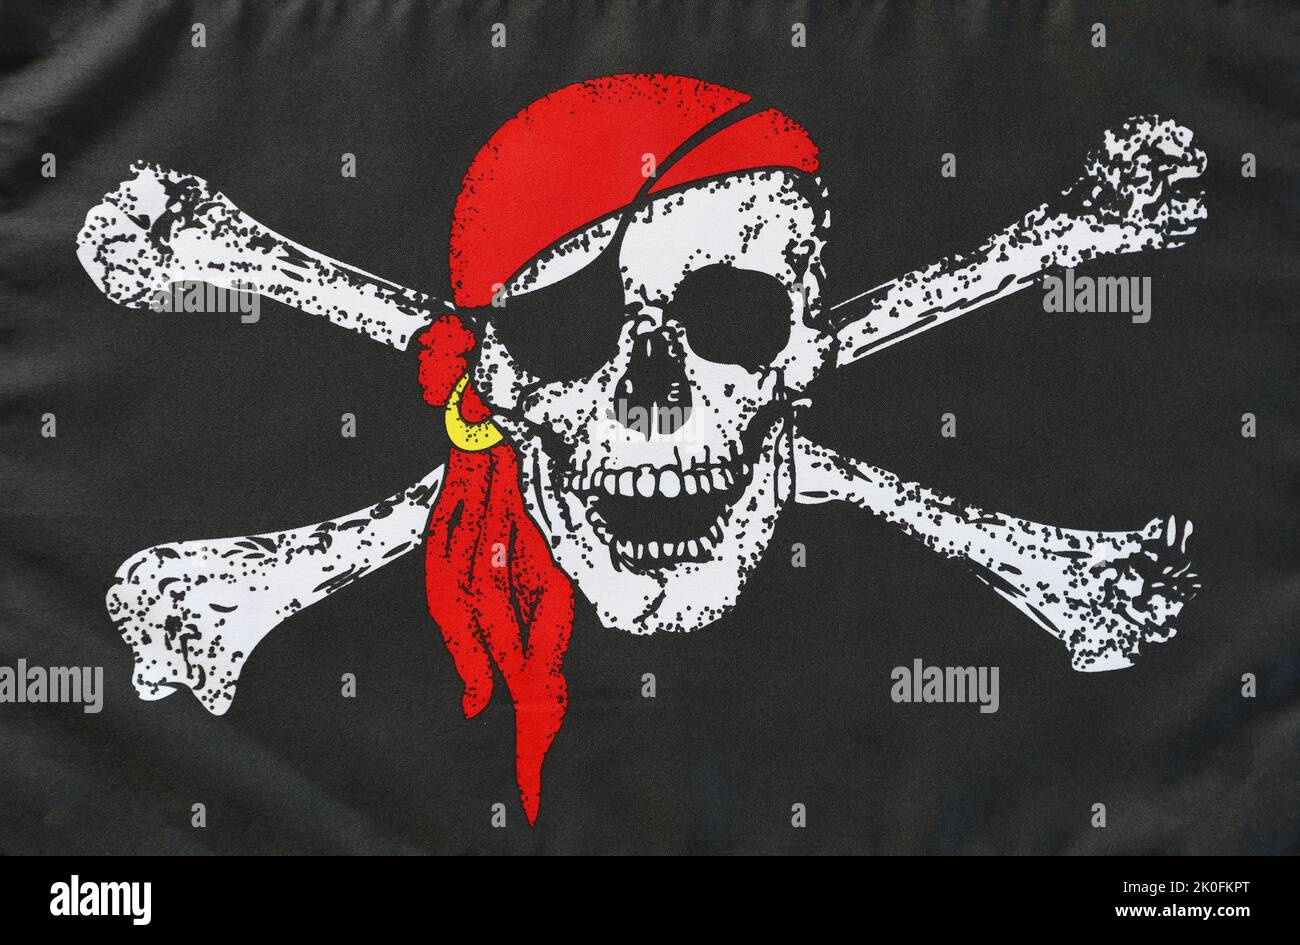 Jolly Roger pirate flag close-up Stock Photo